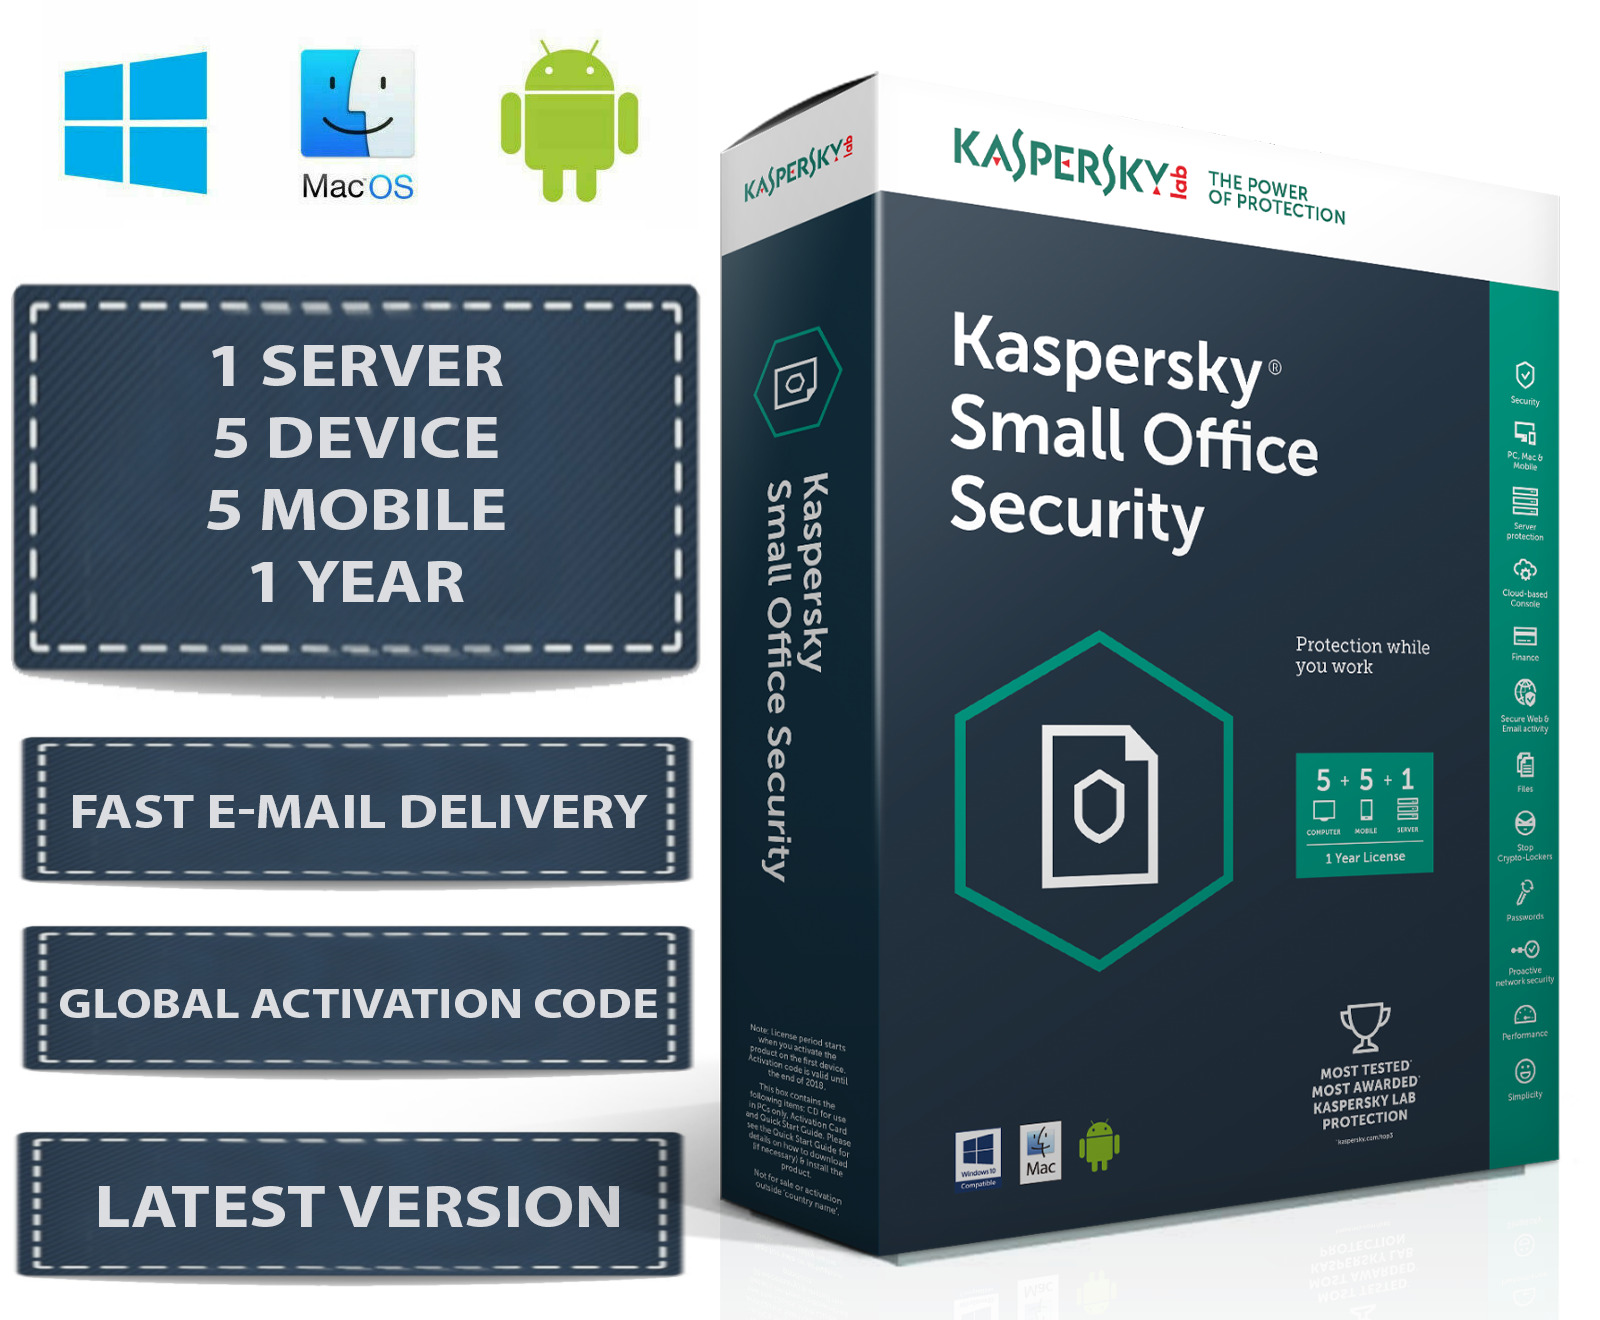 Kaspersky Small Office Security V8 1 Server 5 DEVICE + 5 MOBILE + 1 YEAR